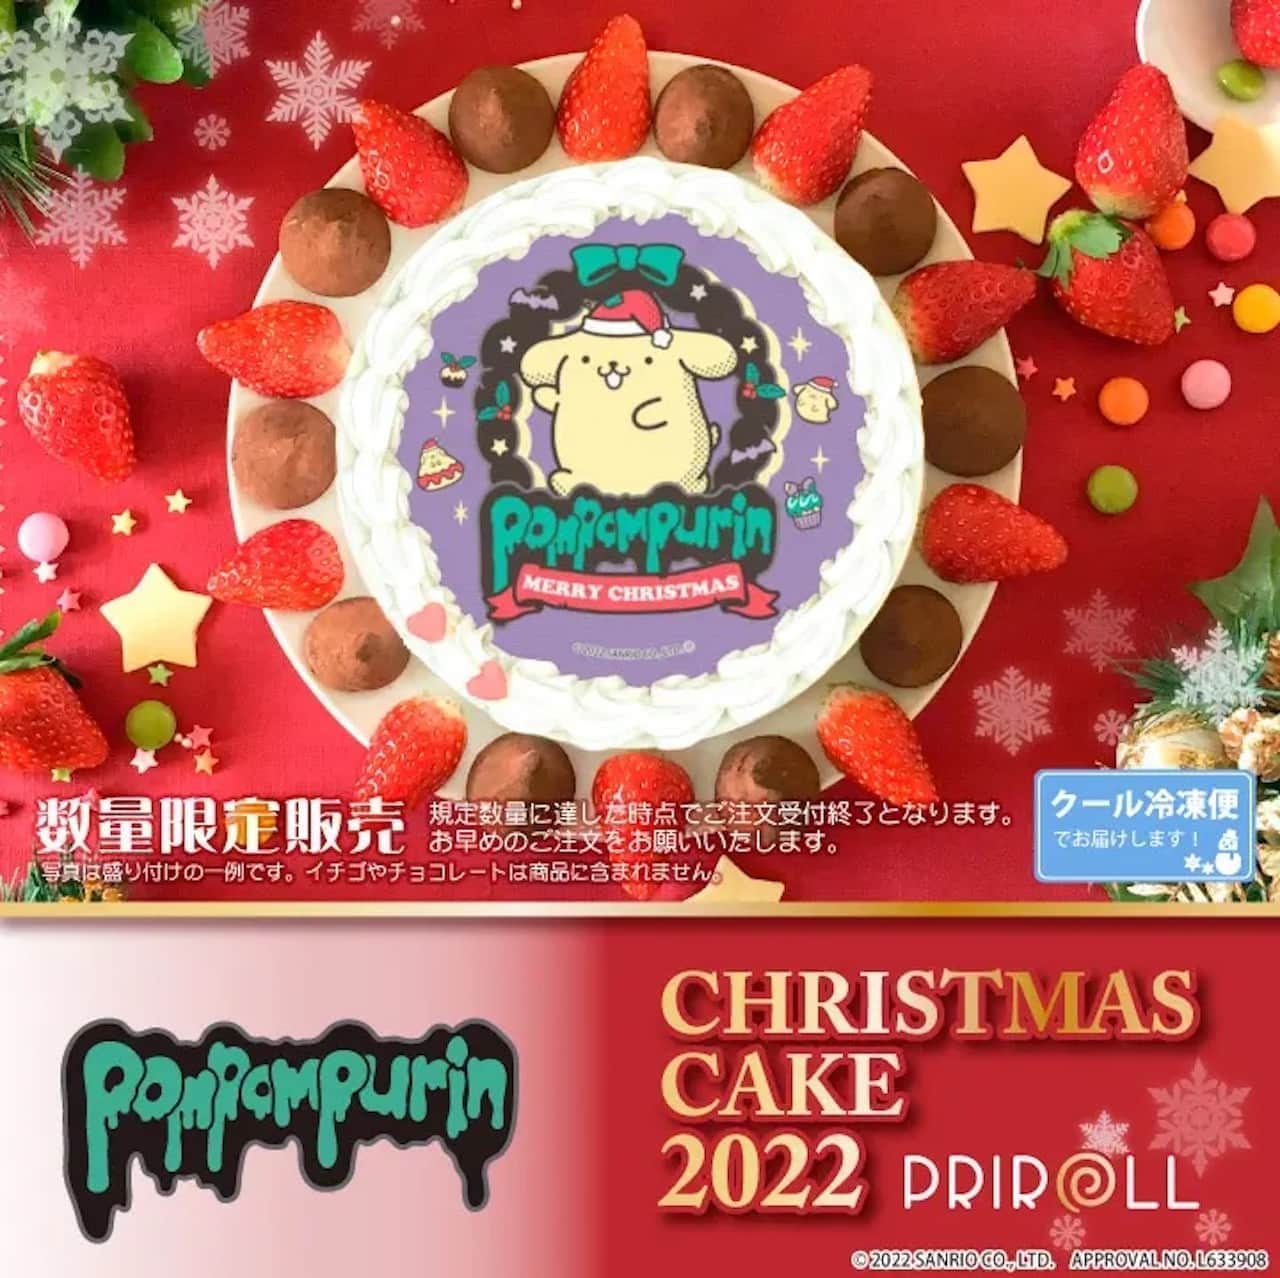 Pom Pom Pudding Christmas Limited Design Printed Cake 2022 Pre-order now available at Pre-Roll